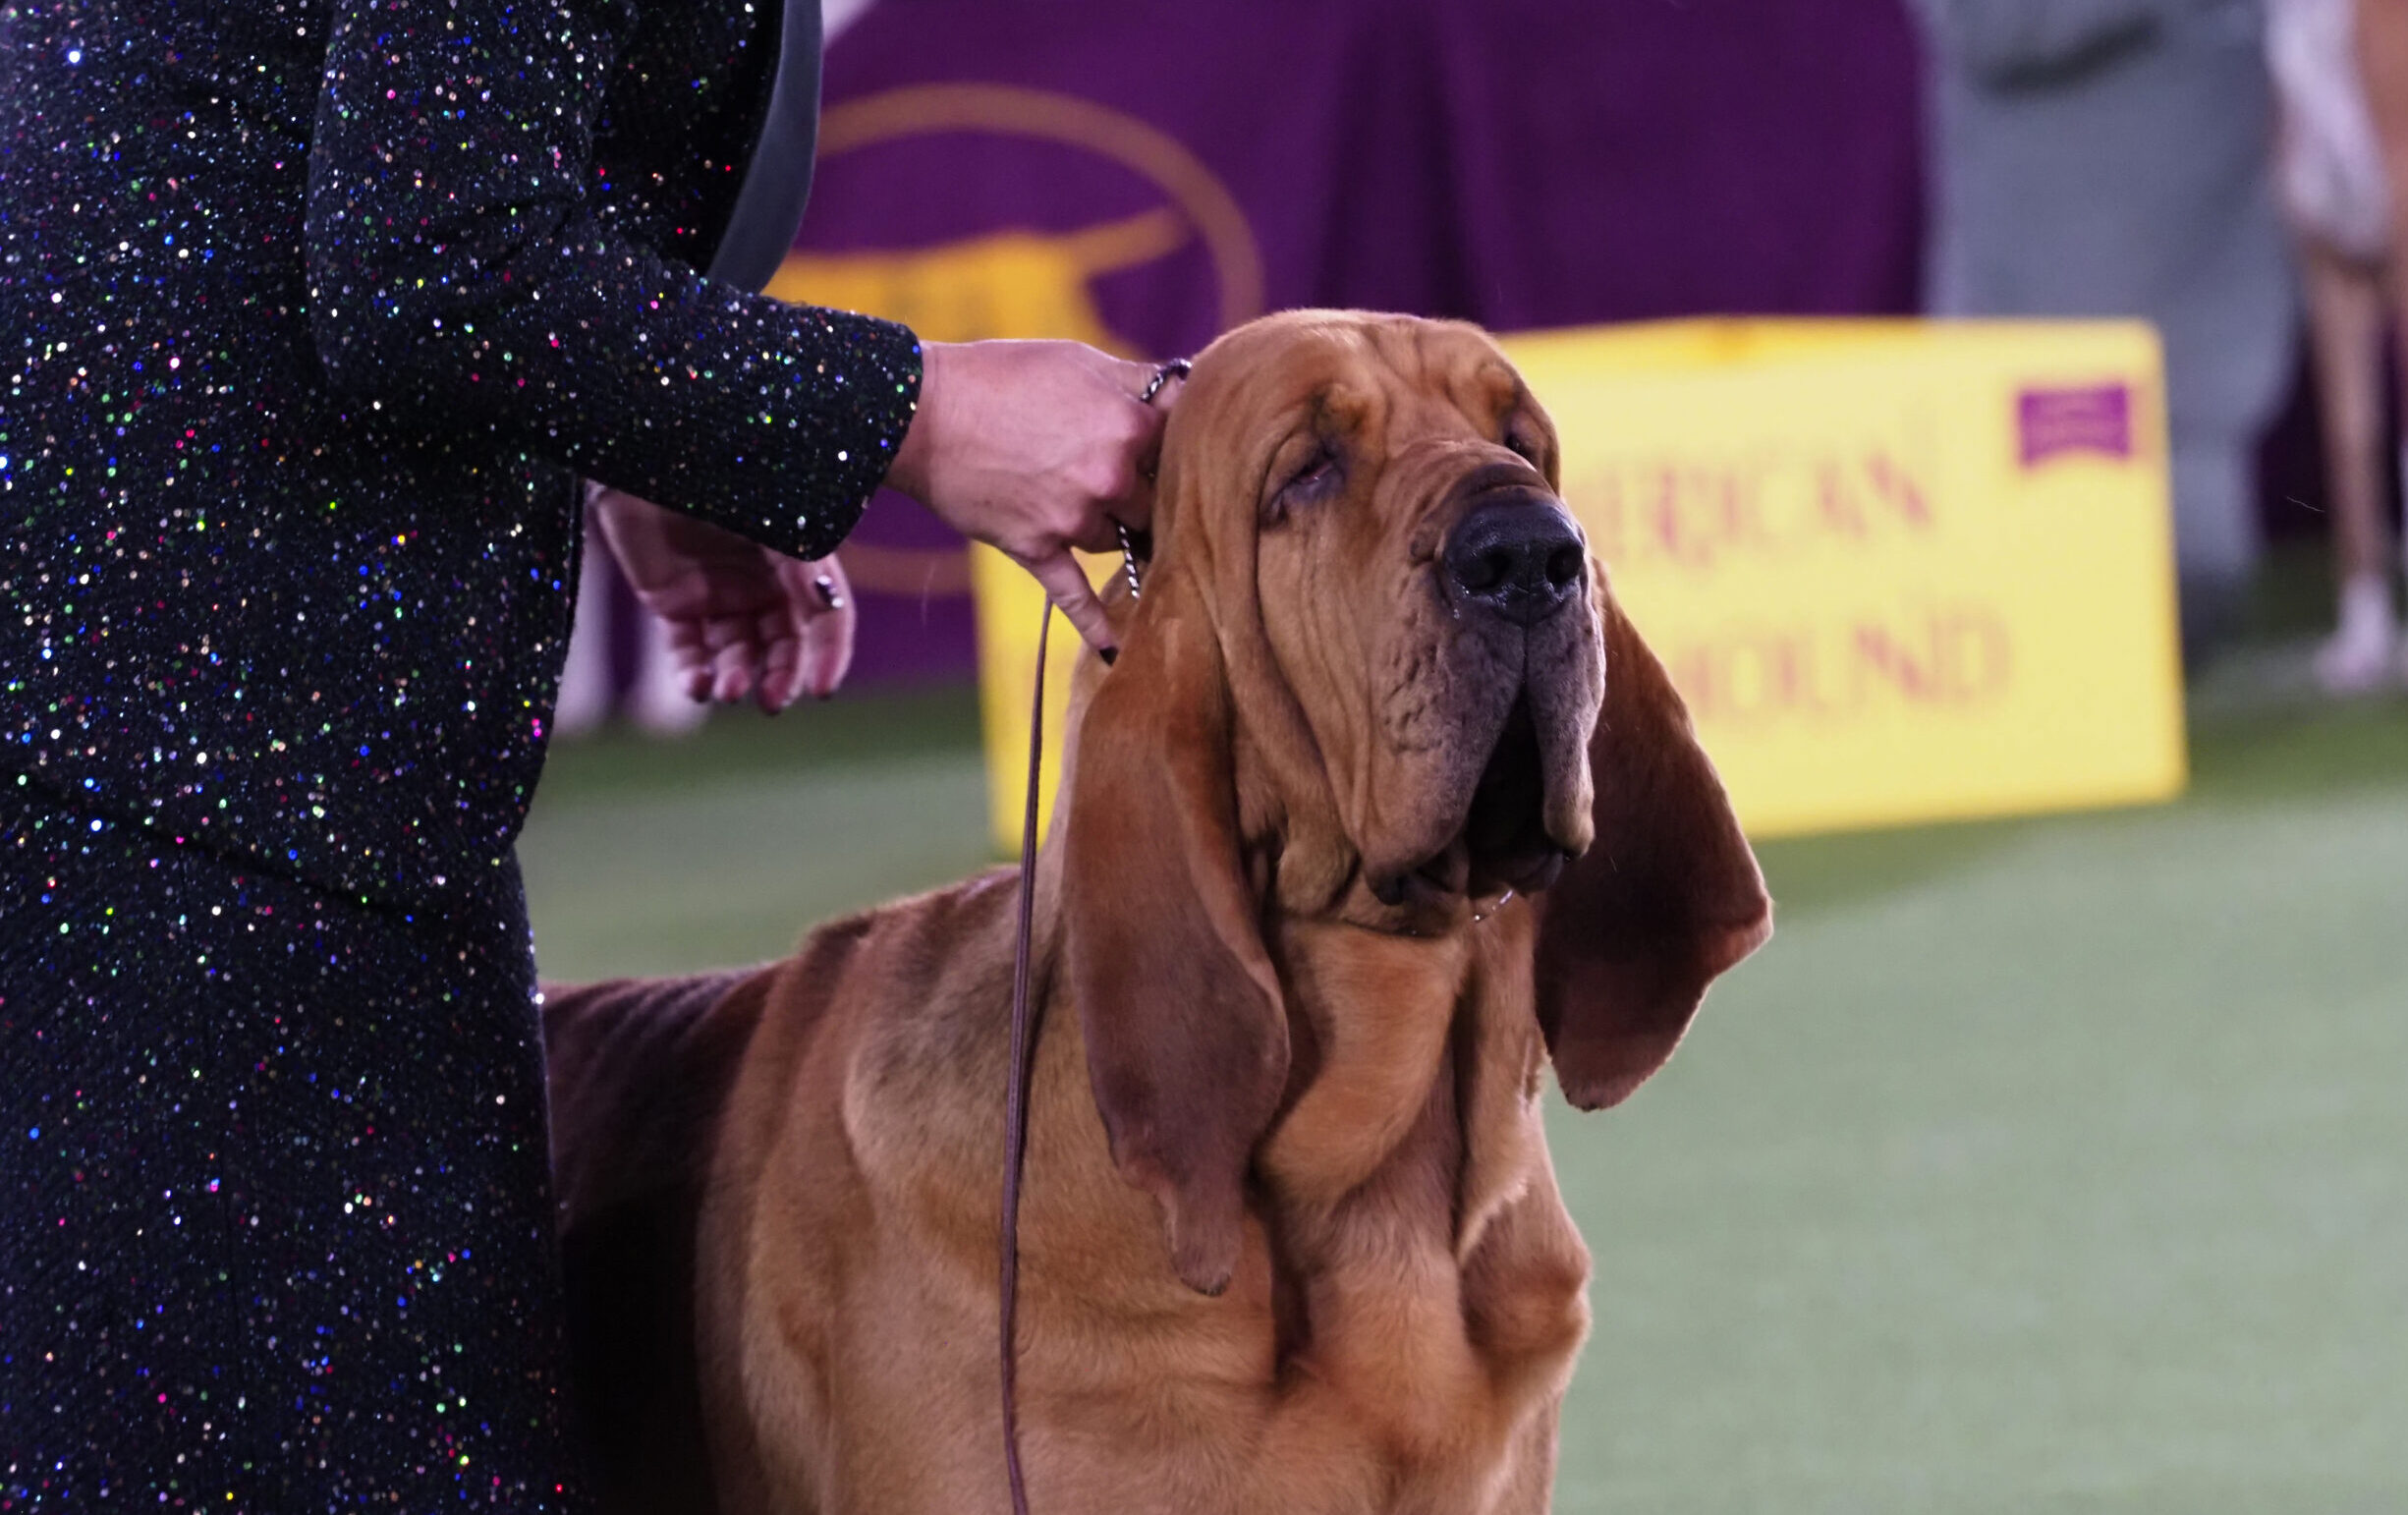  A Bloodhound from St. Joseph wins at the Westminster Kennel Club Dog Show 